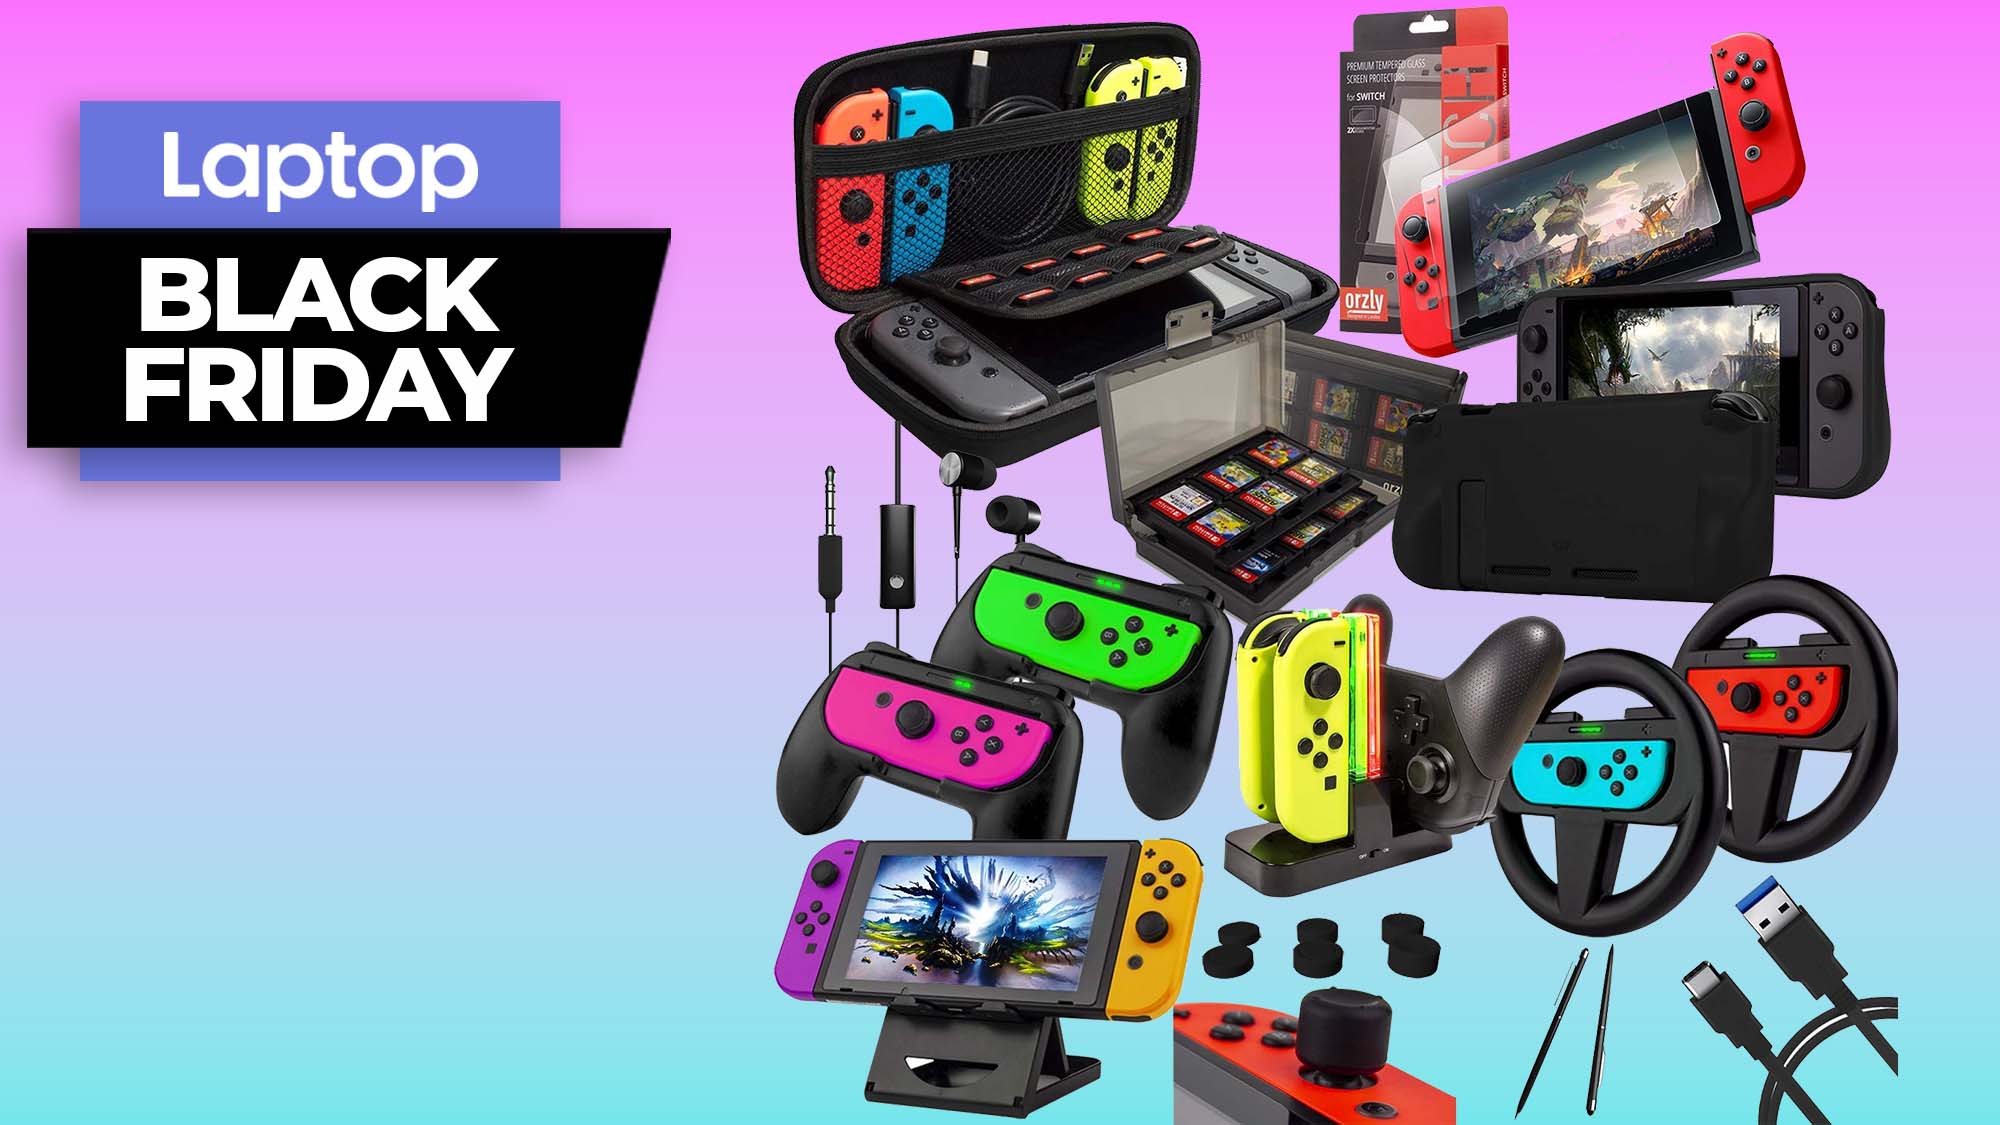 Orzly Nintendo Switch accessory pack arranged on a gradient background with a Black Friday banner in the upper left corner